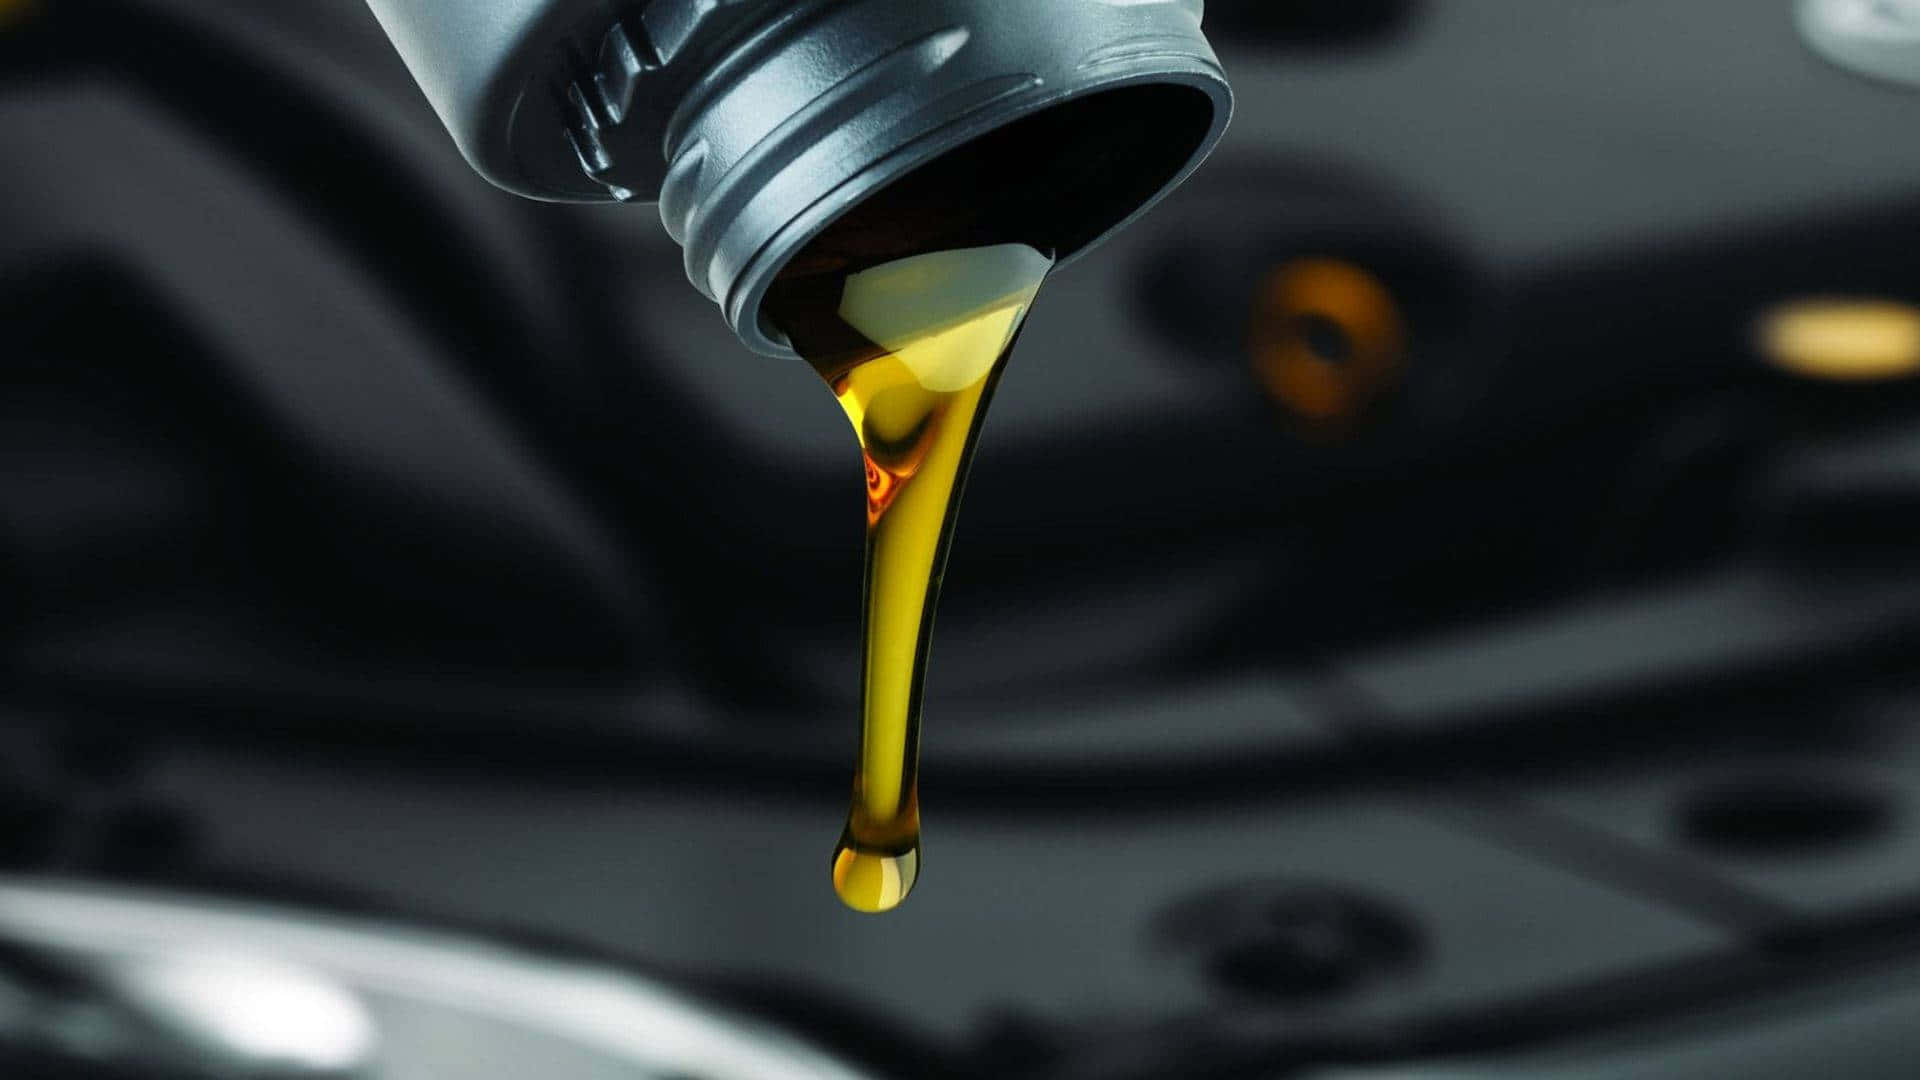 Regular engine oil changes are crucial for your car's health